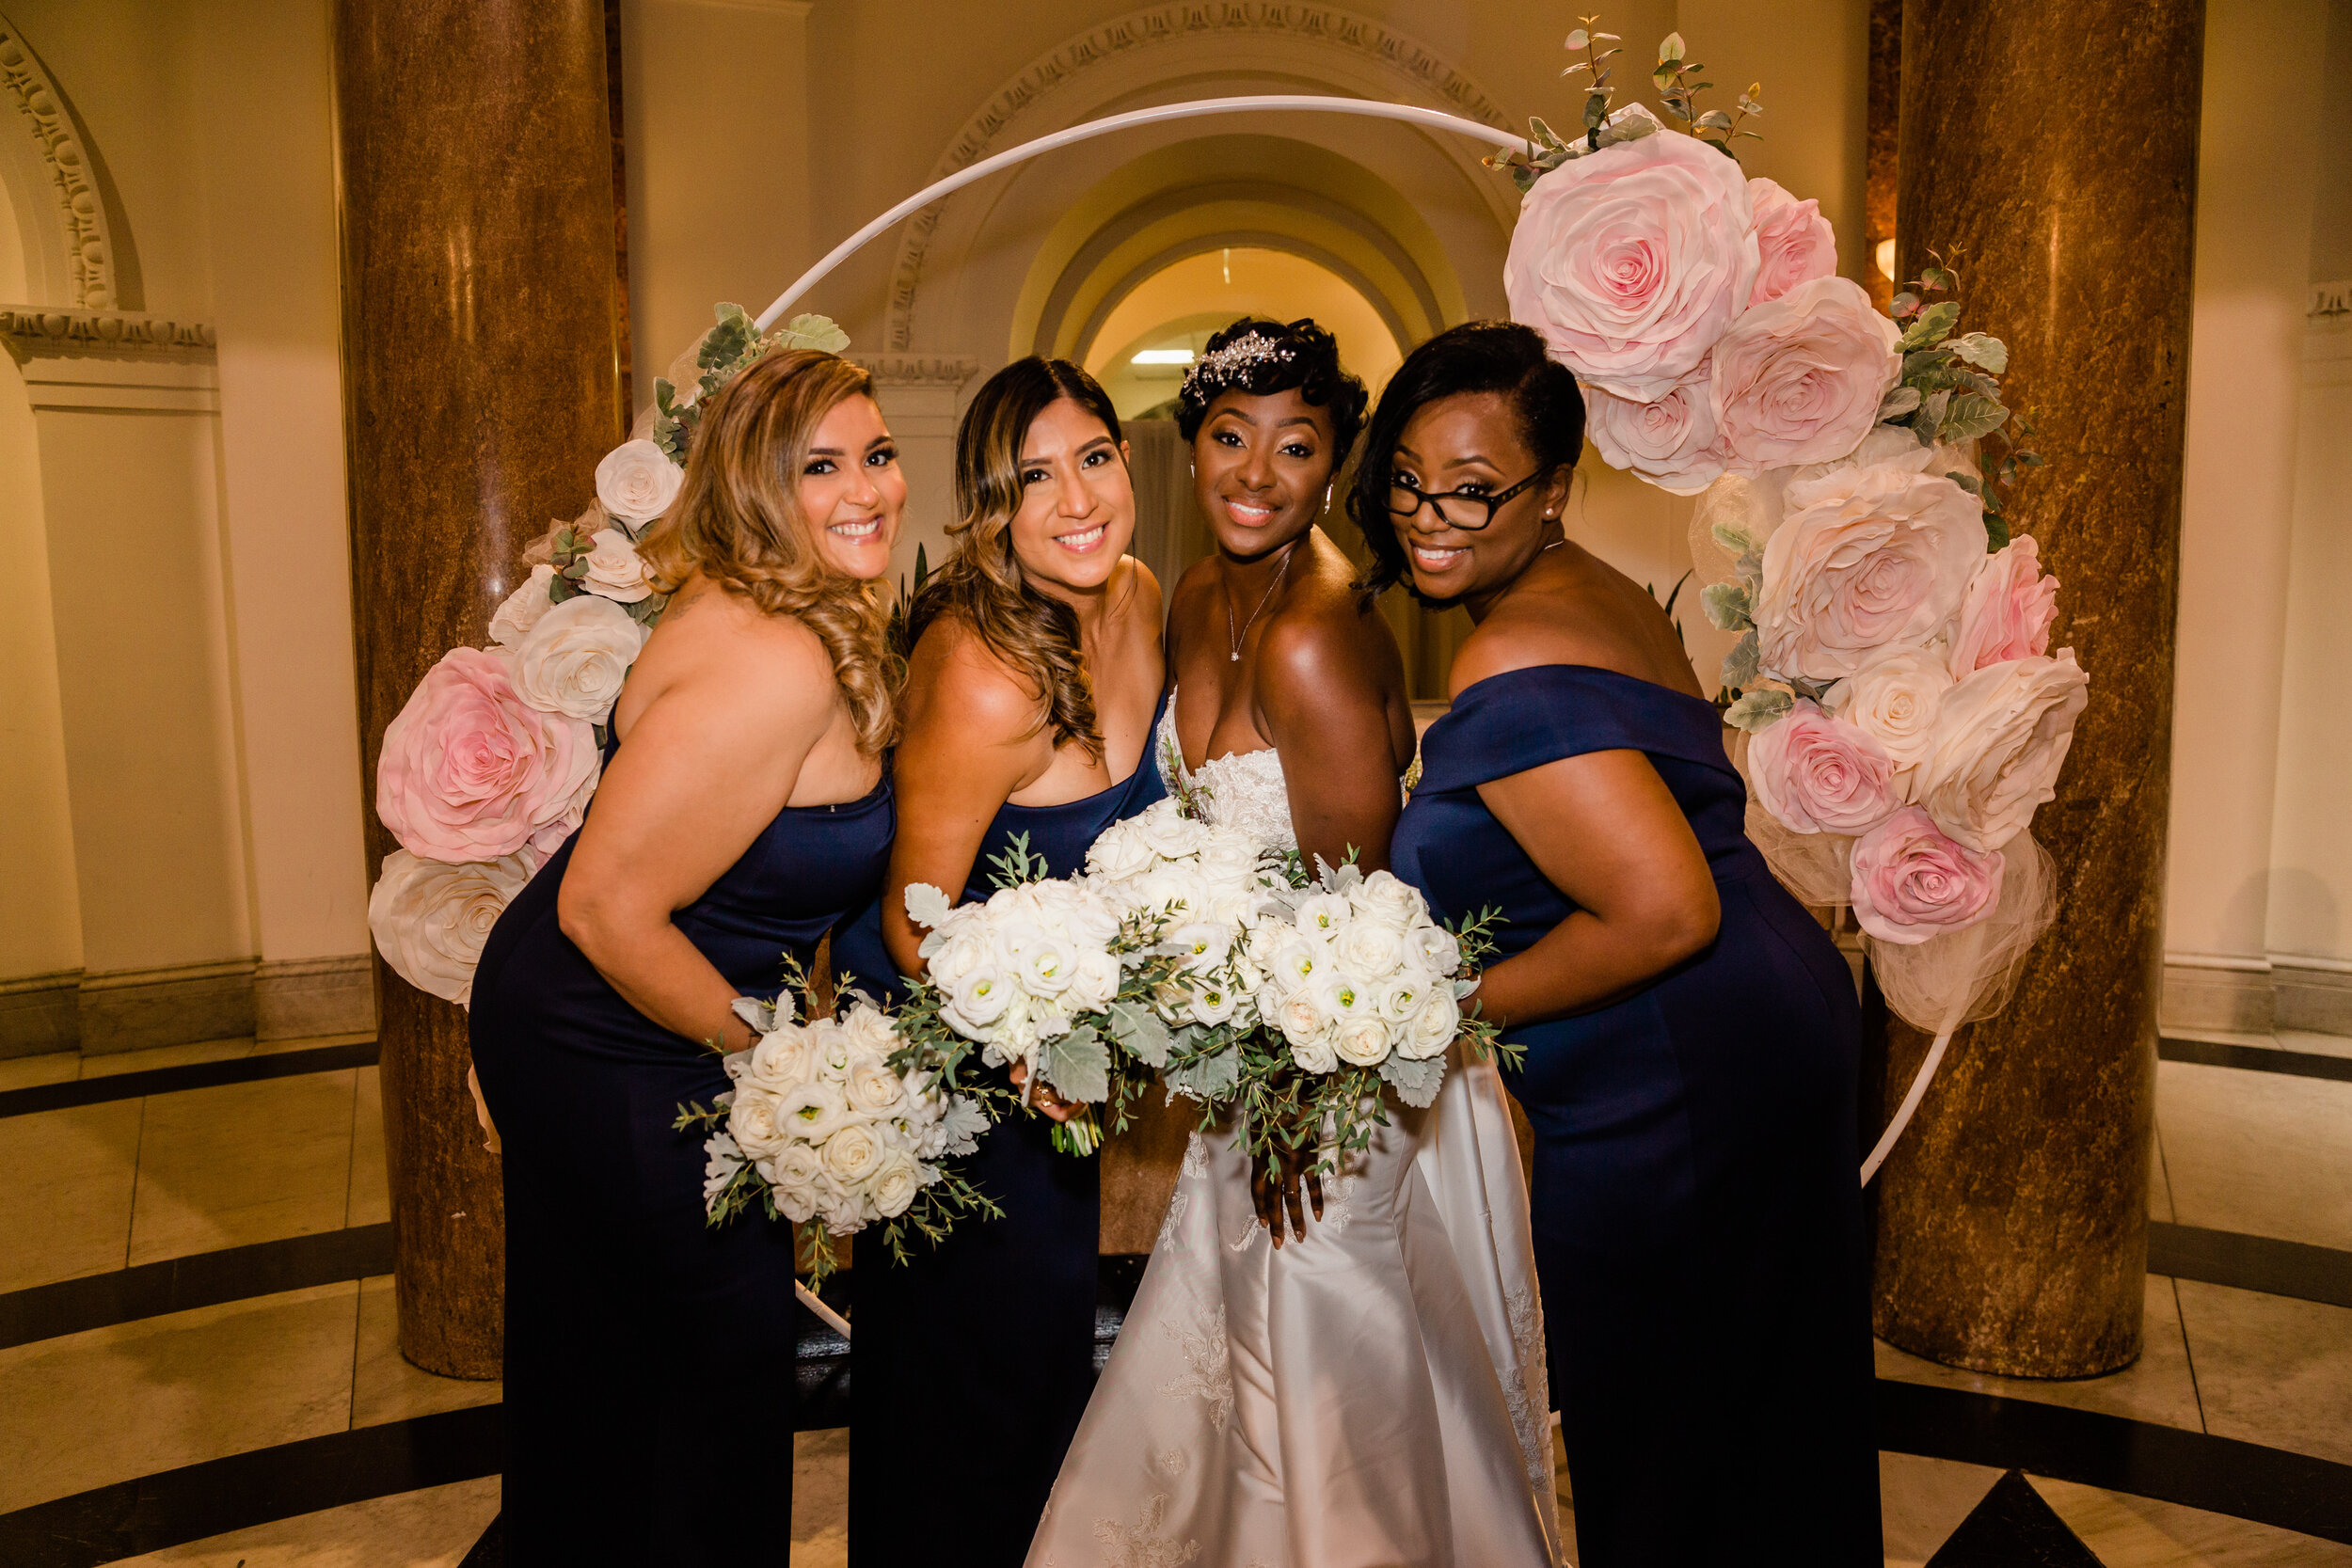 get married in baltimore city hall shot by megapixels media biracial couple wedding photographers maryland-77.jpg